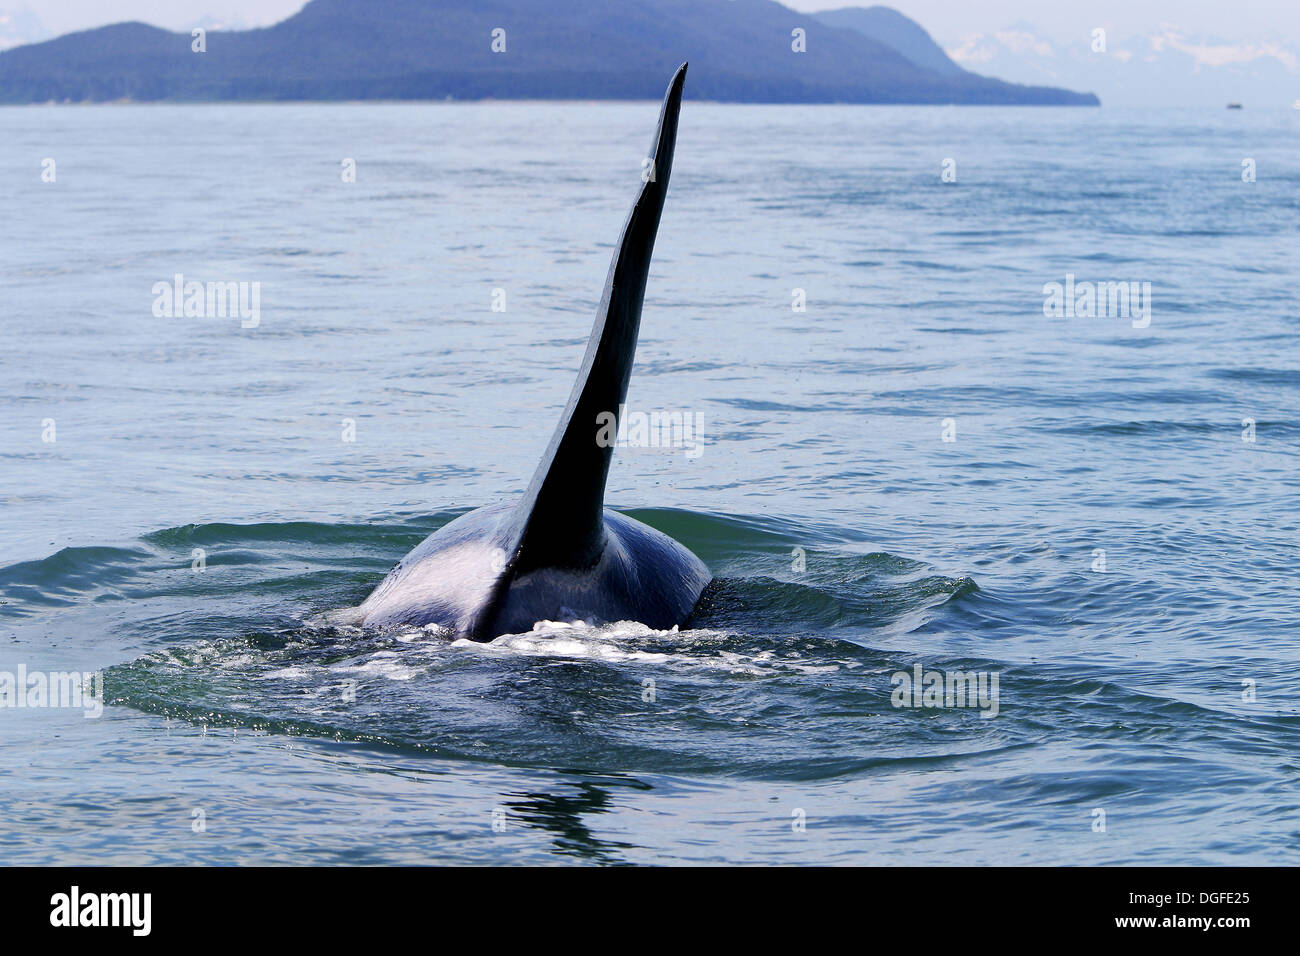 Transient Bull Orca (Orcinus orca) - also called Killer Whale - in Stephen´s passage, Southeast Alaska, USA. Pacific Ocean. Stock Photo